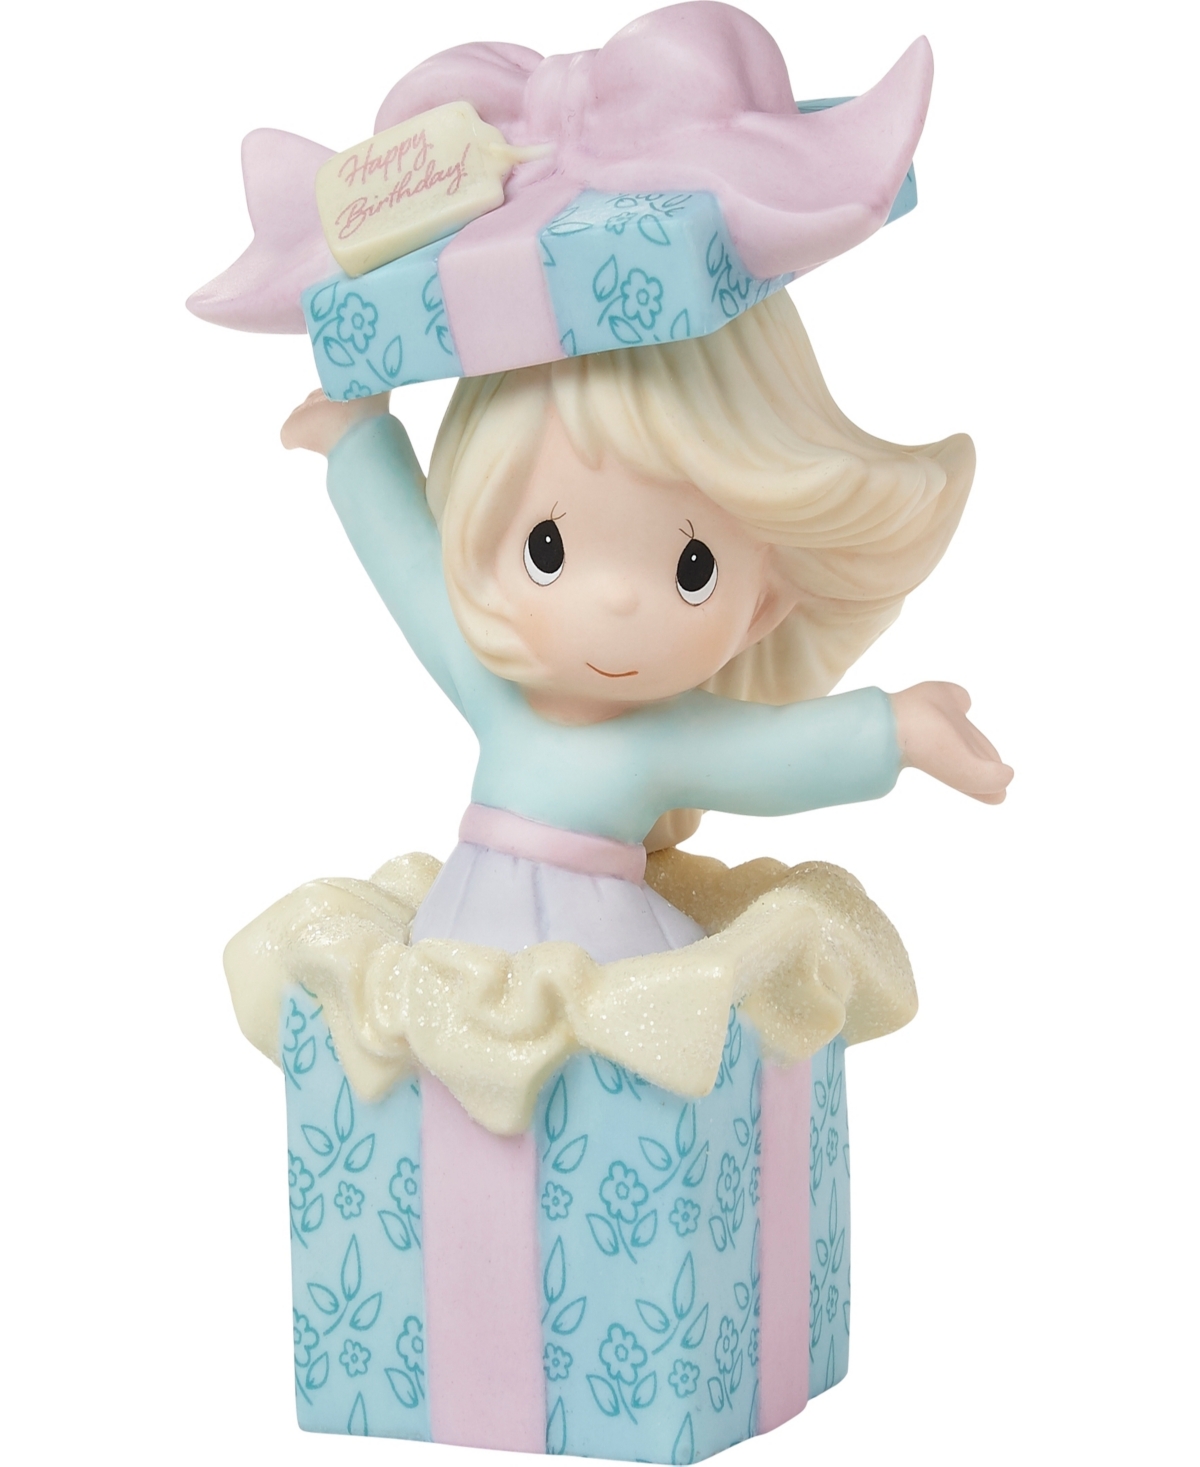 Precious Moments 222012 Wishing You Many Birthday Surprises Porcelain Figurine In Multicolored